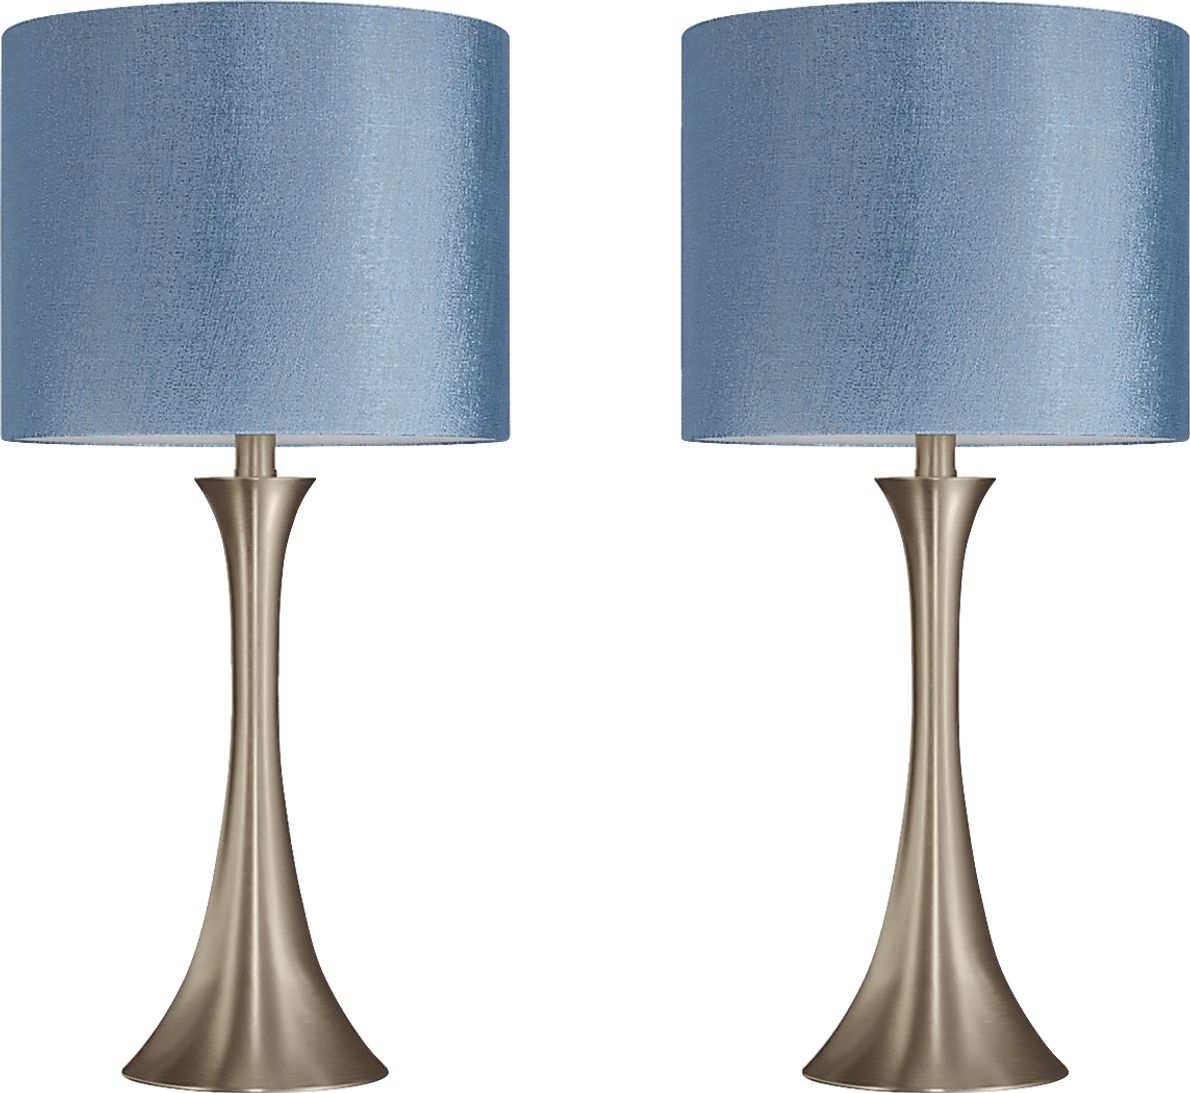 Keely Alley Teal Lamp, Set of 2